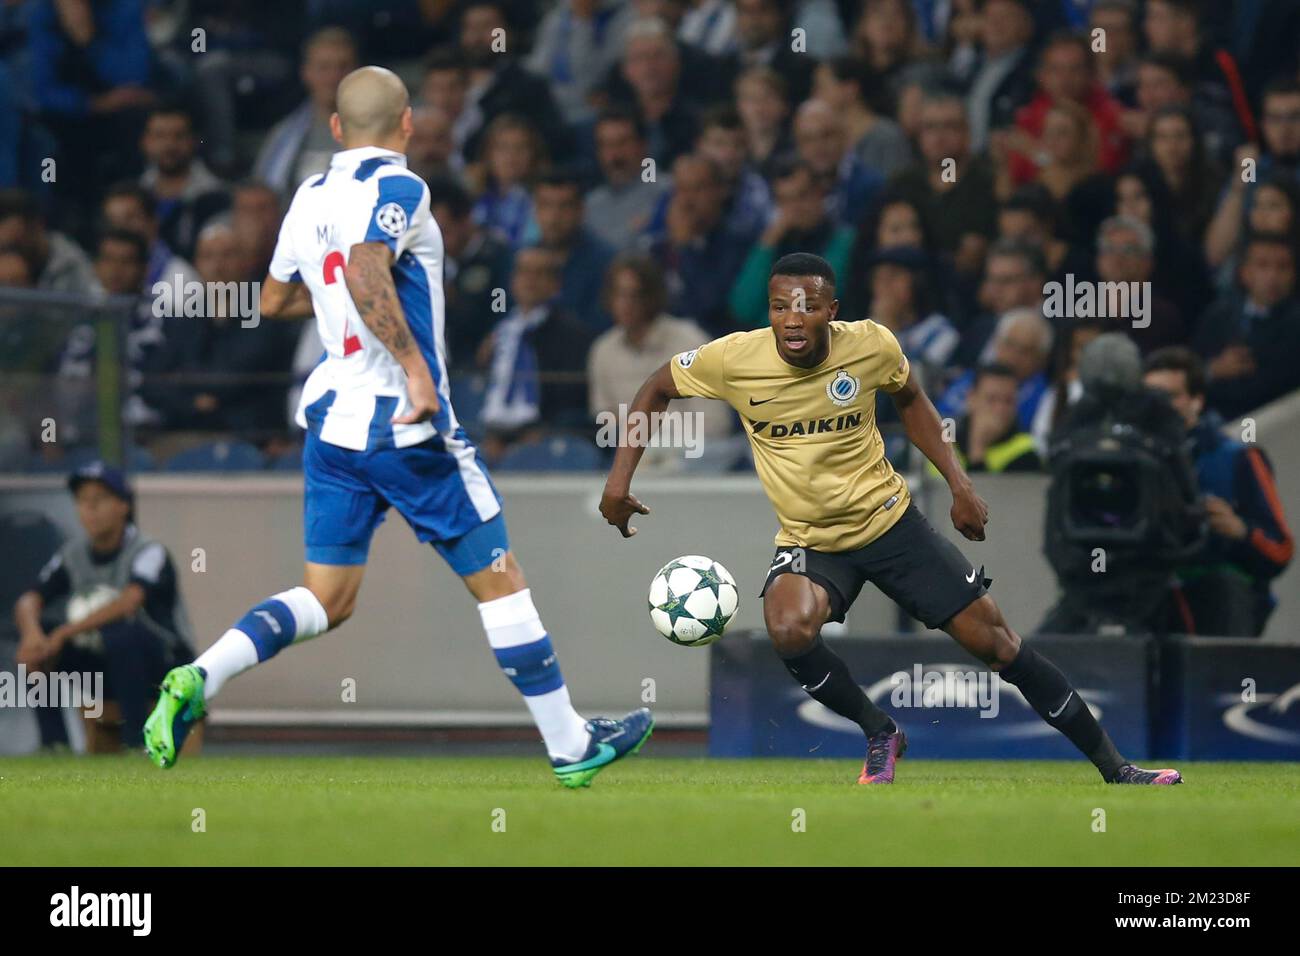 Porto's defender Maxi Pereira and Club's Boli Bolingoli Mbombo fight for the ball during the fourth game of the group stage between Portuguese soccer team Porto and Belgian soccer team Club Brugge in the Champions League competition, on Wednesday 02 November 2016, in Porto, Portugal. BELGA PHOTO BRUNO FAHY Stock Photo